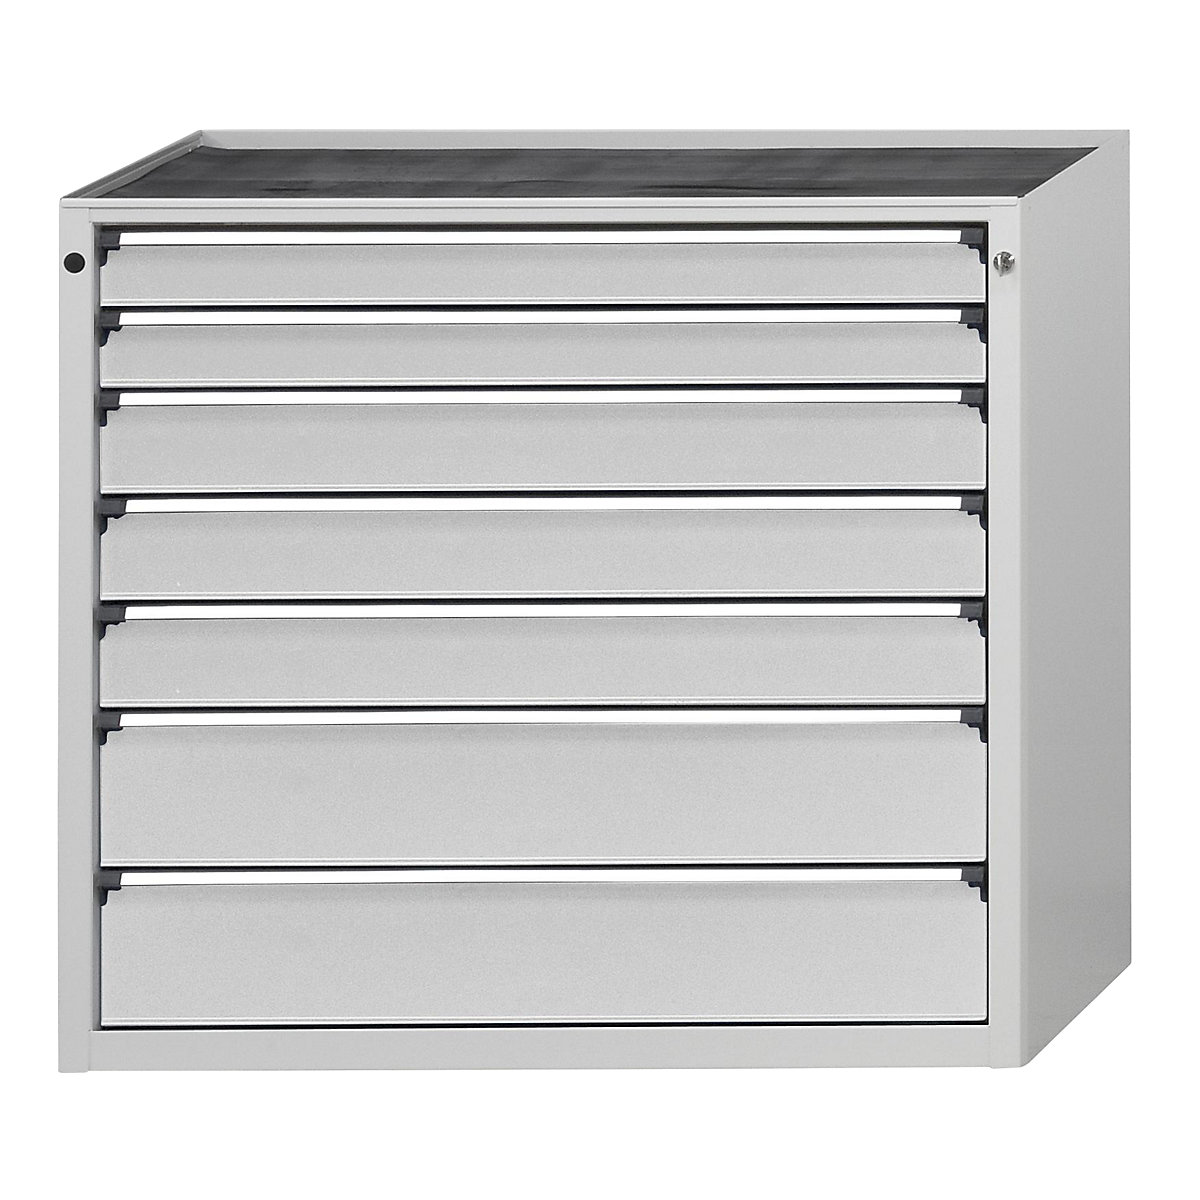 Drawer cupboard without worktop – ANKE, width 1060 mm, max. drawer load 200 kg, 7 drawers, front in light grey-3